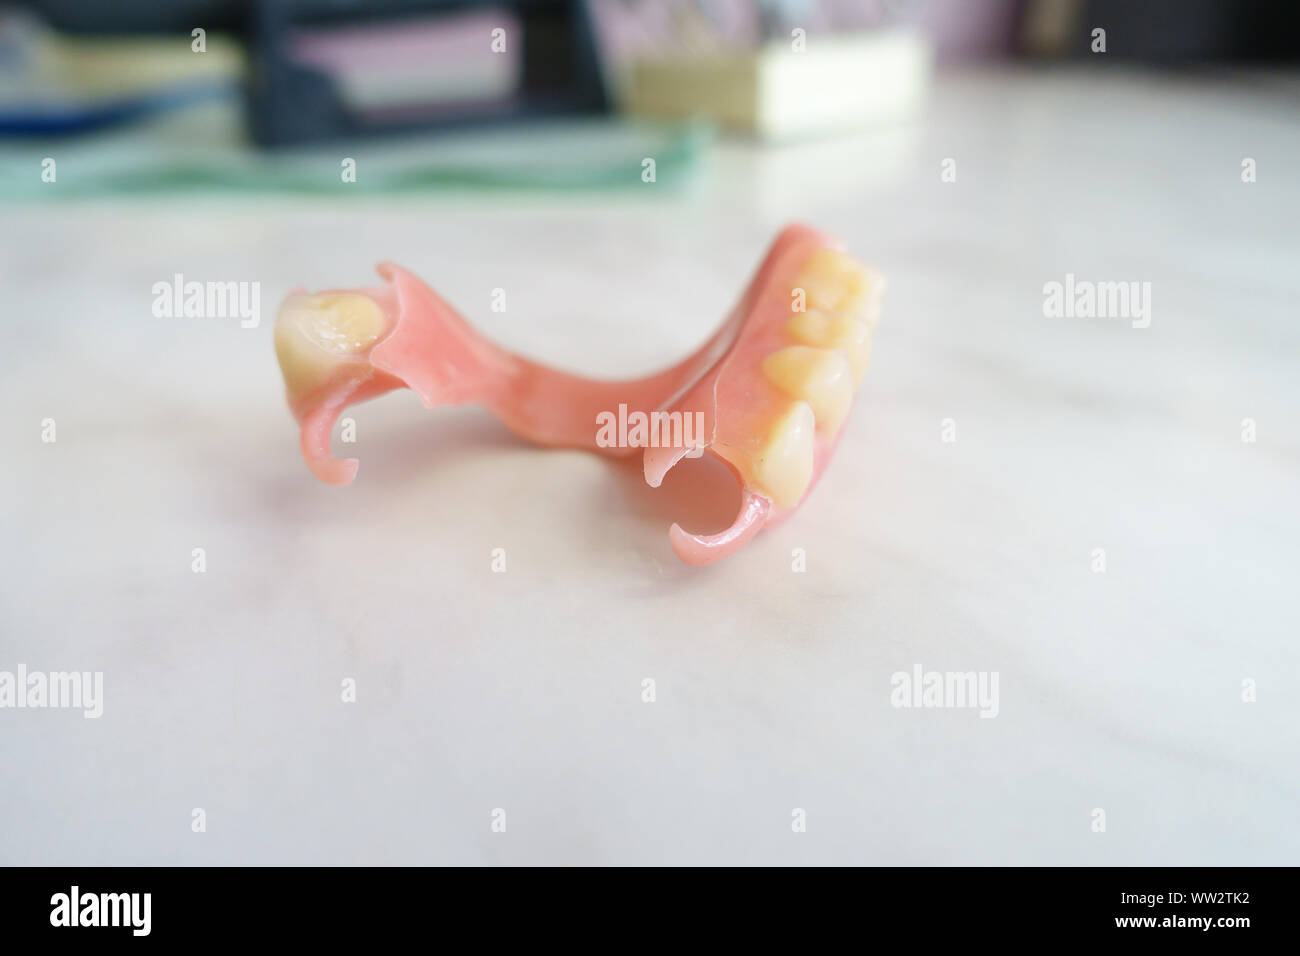 Artificial removable dental prosthesis to restore the integrity of the dentition Stock Photo